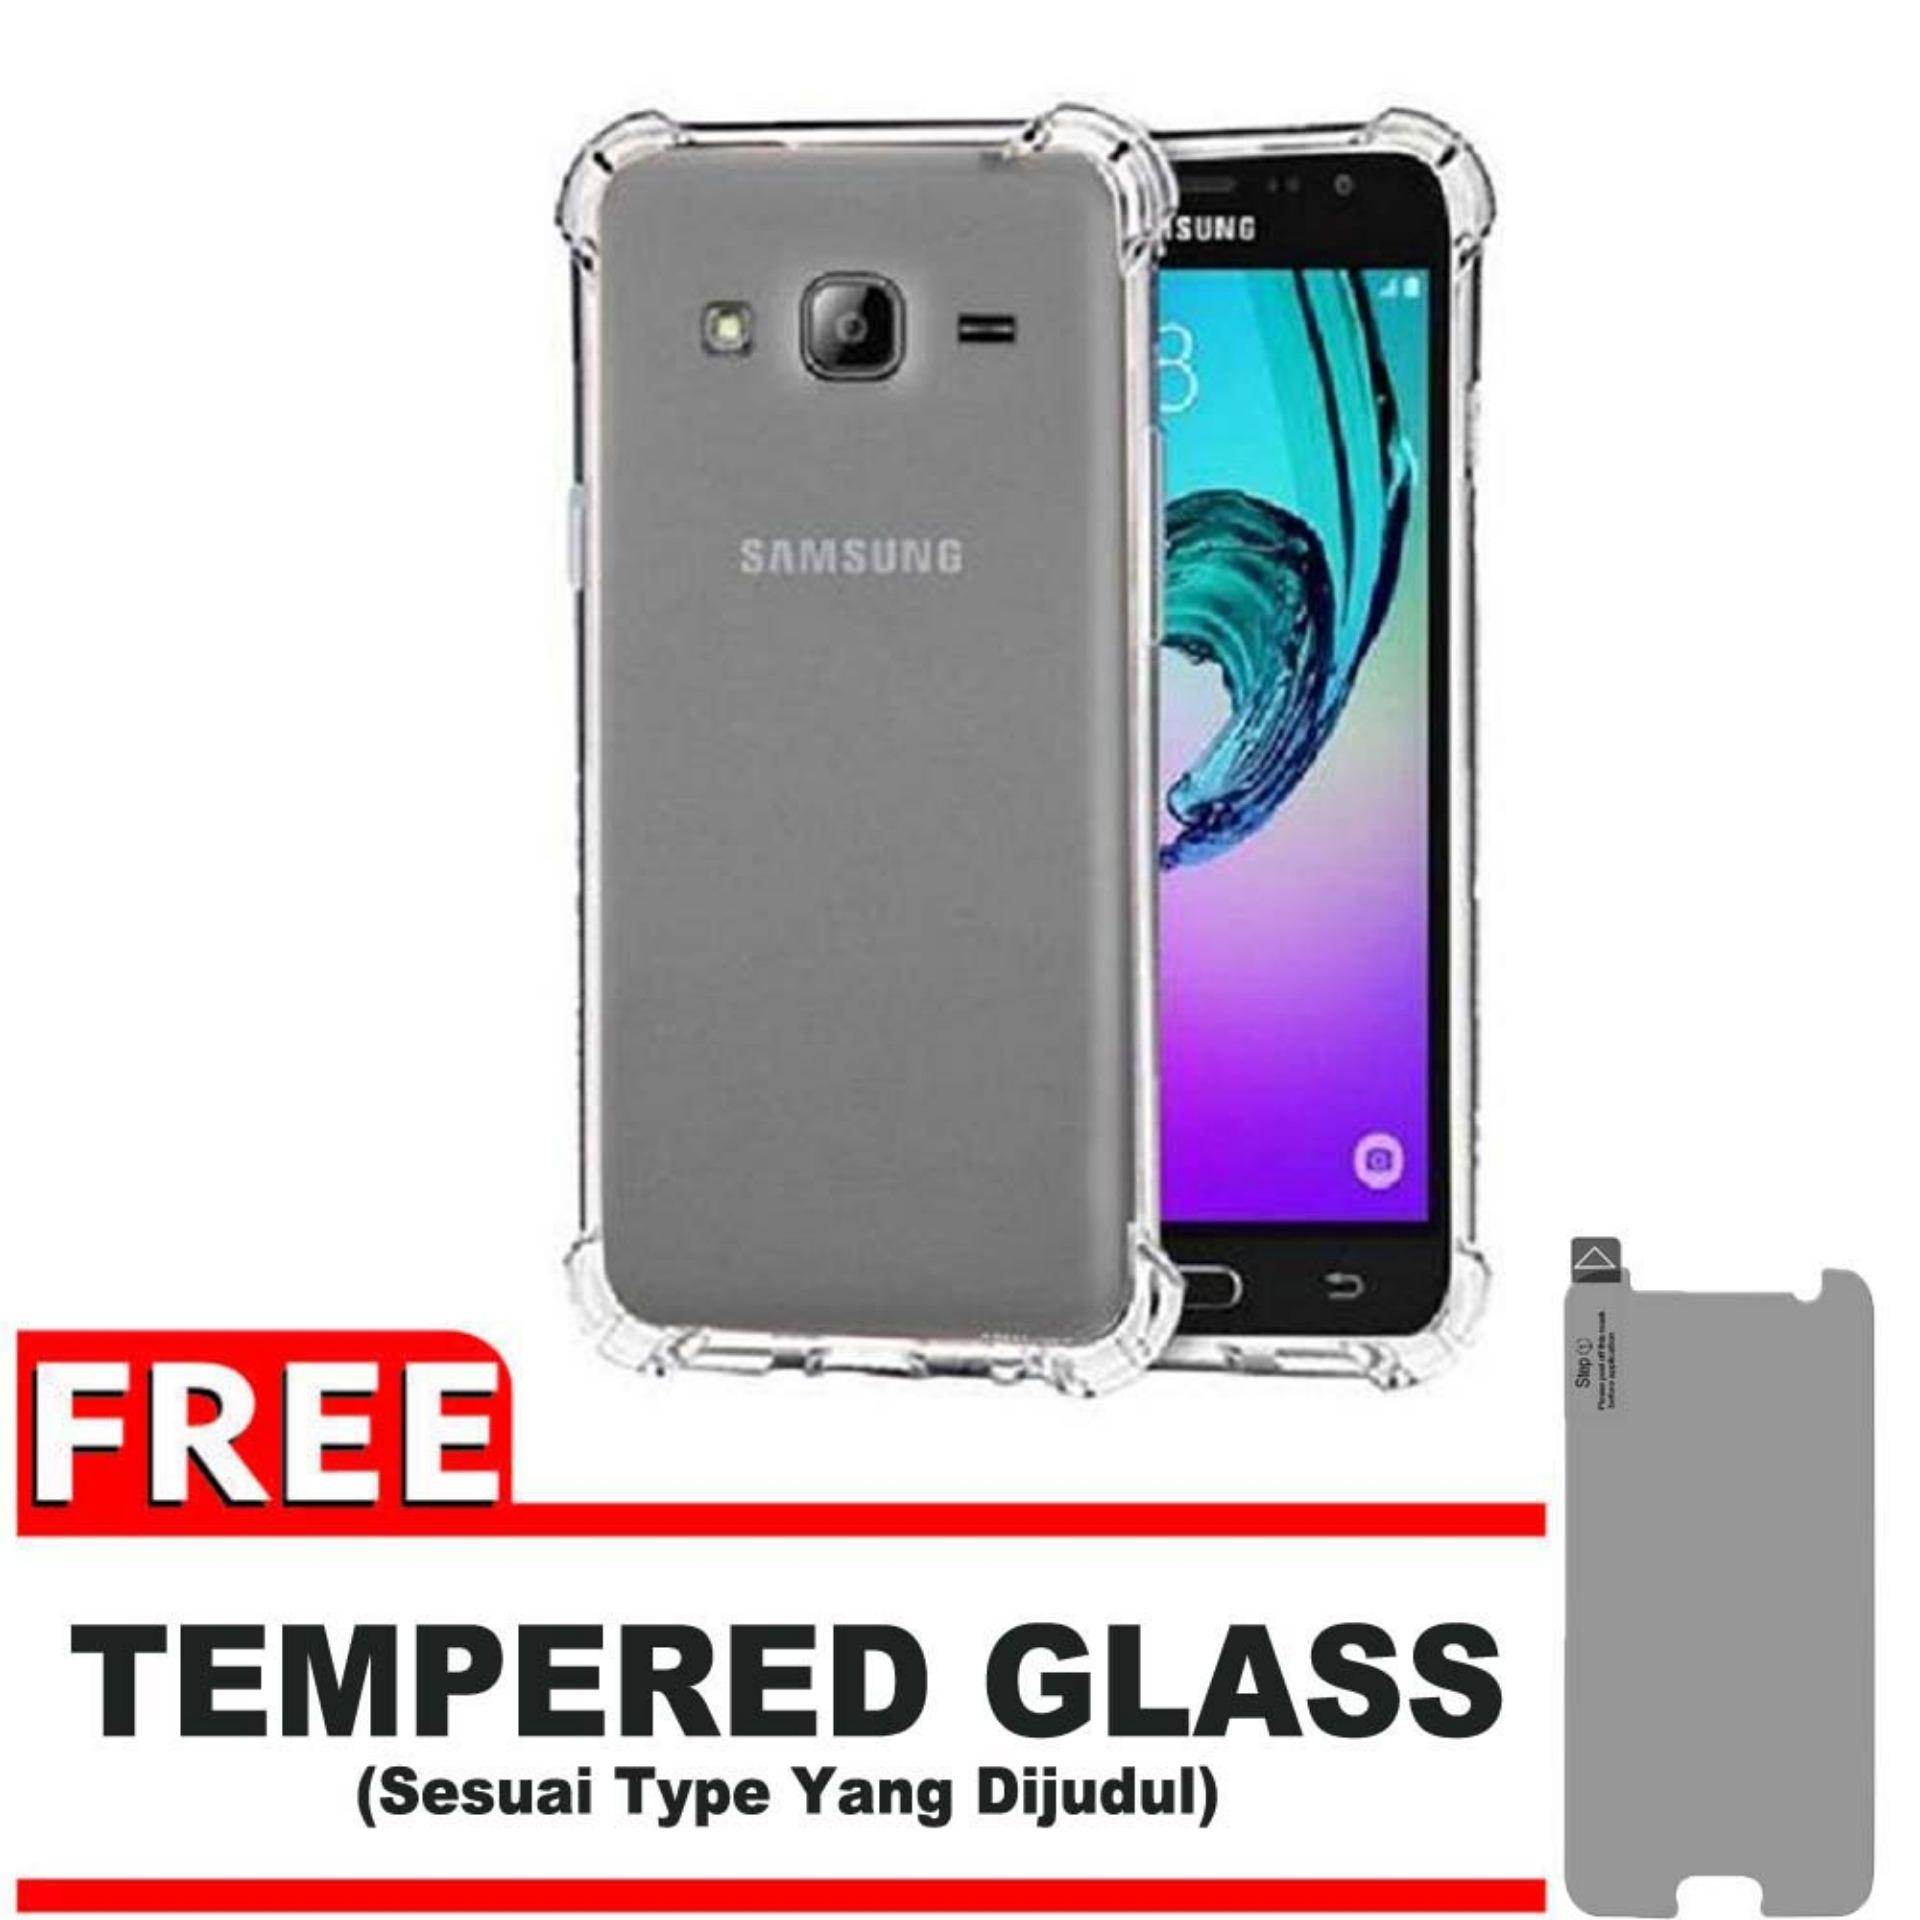 ShockCase for Samsung Galaxy J2 (2015) / J200 / 4G LTE / Duos | Premium Softcase Jelly Anti Crack Shockproof - Gratis Free Tempered Glass Protector - Transparan